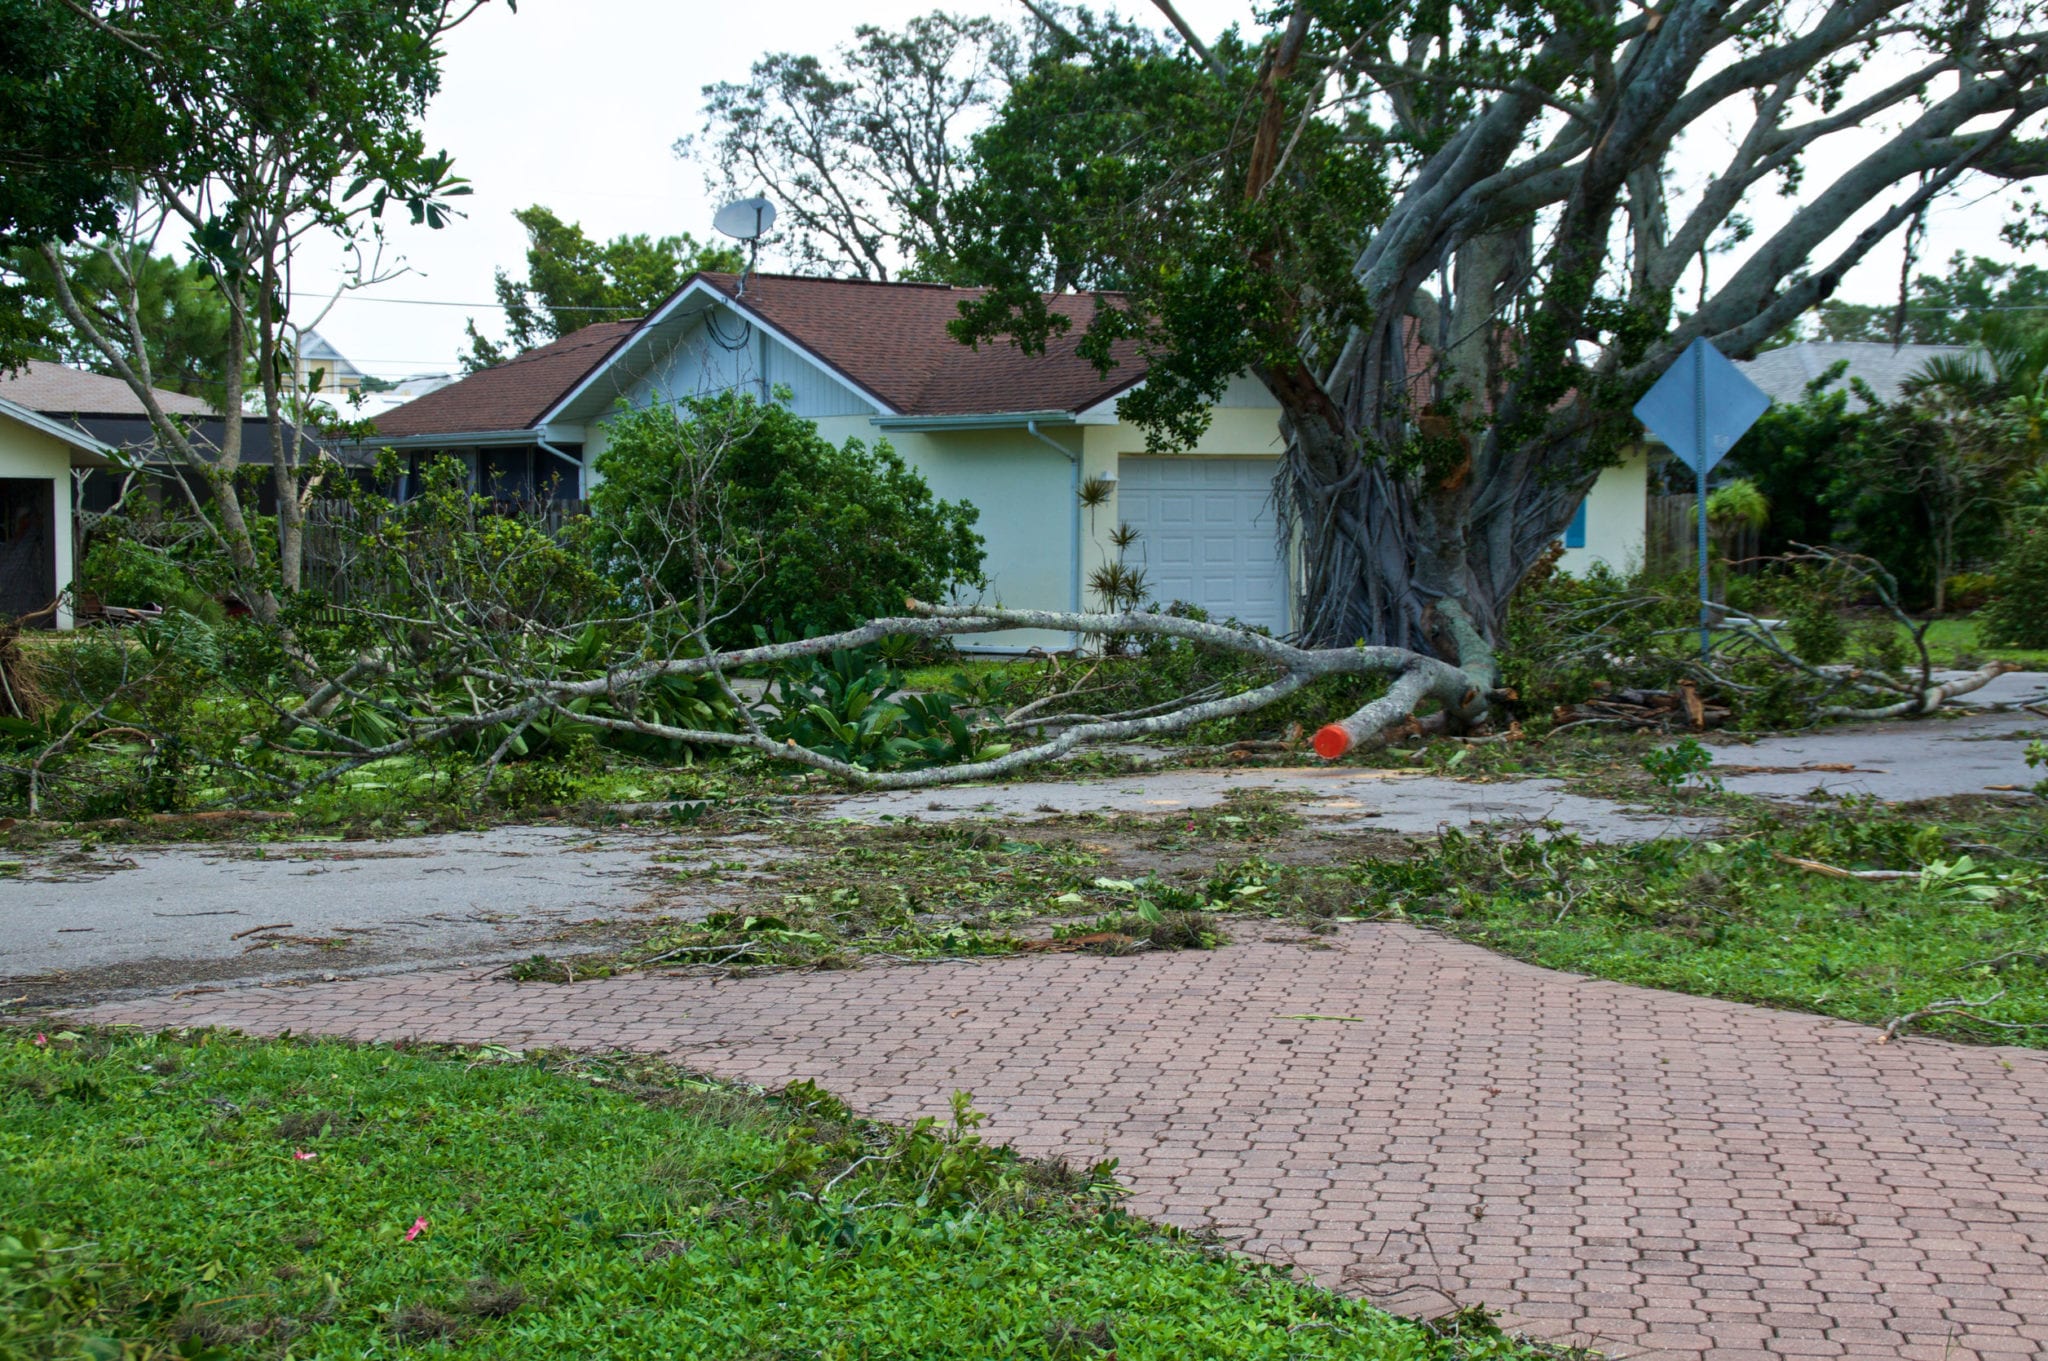 Is the Cause of My FL Property Damage Considered an Insured Event?